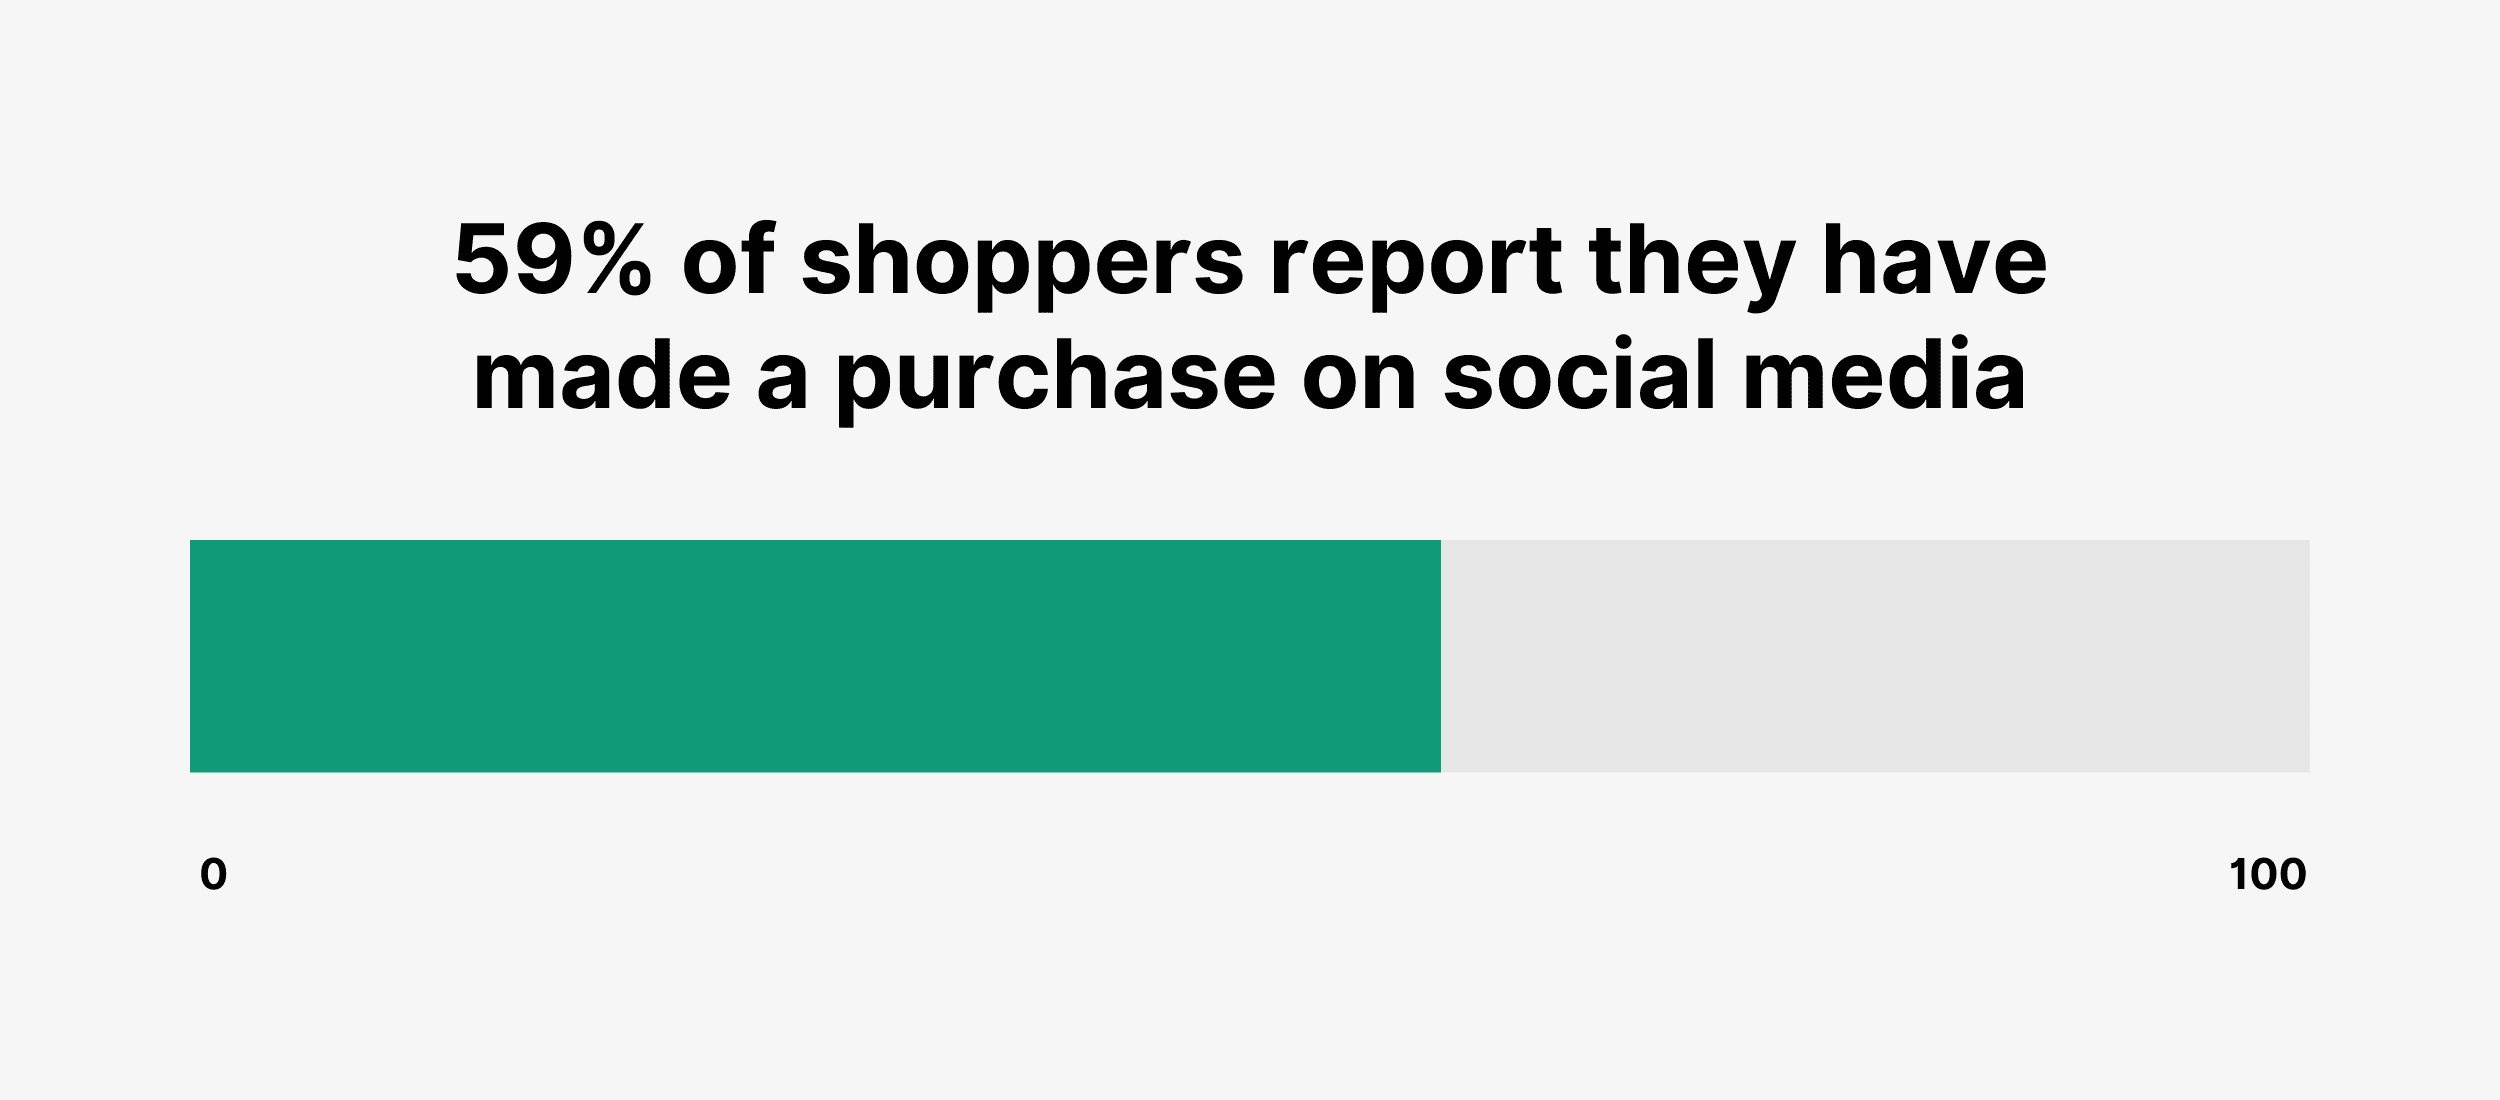 59% of shoppers report they have made a purchase on social media